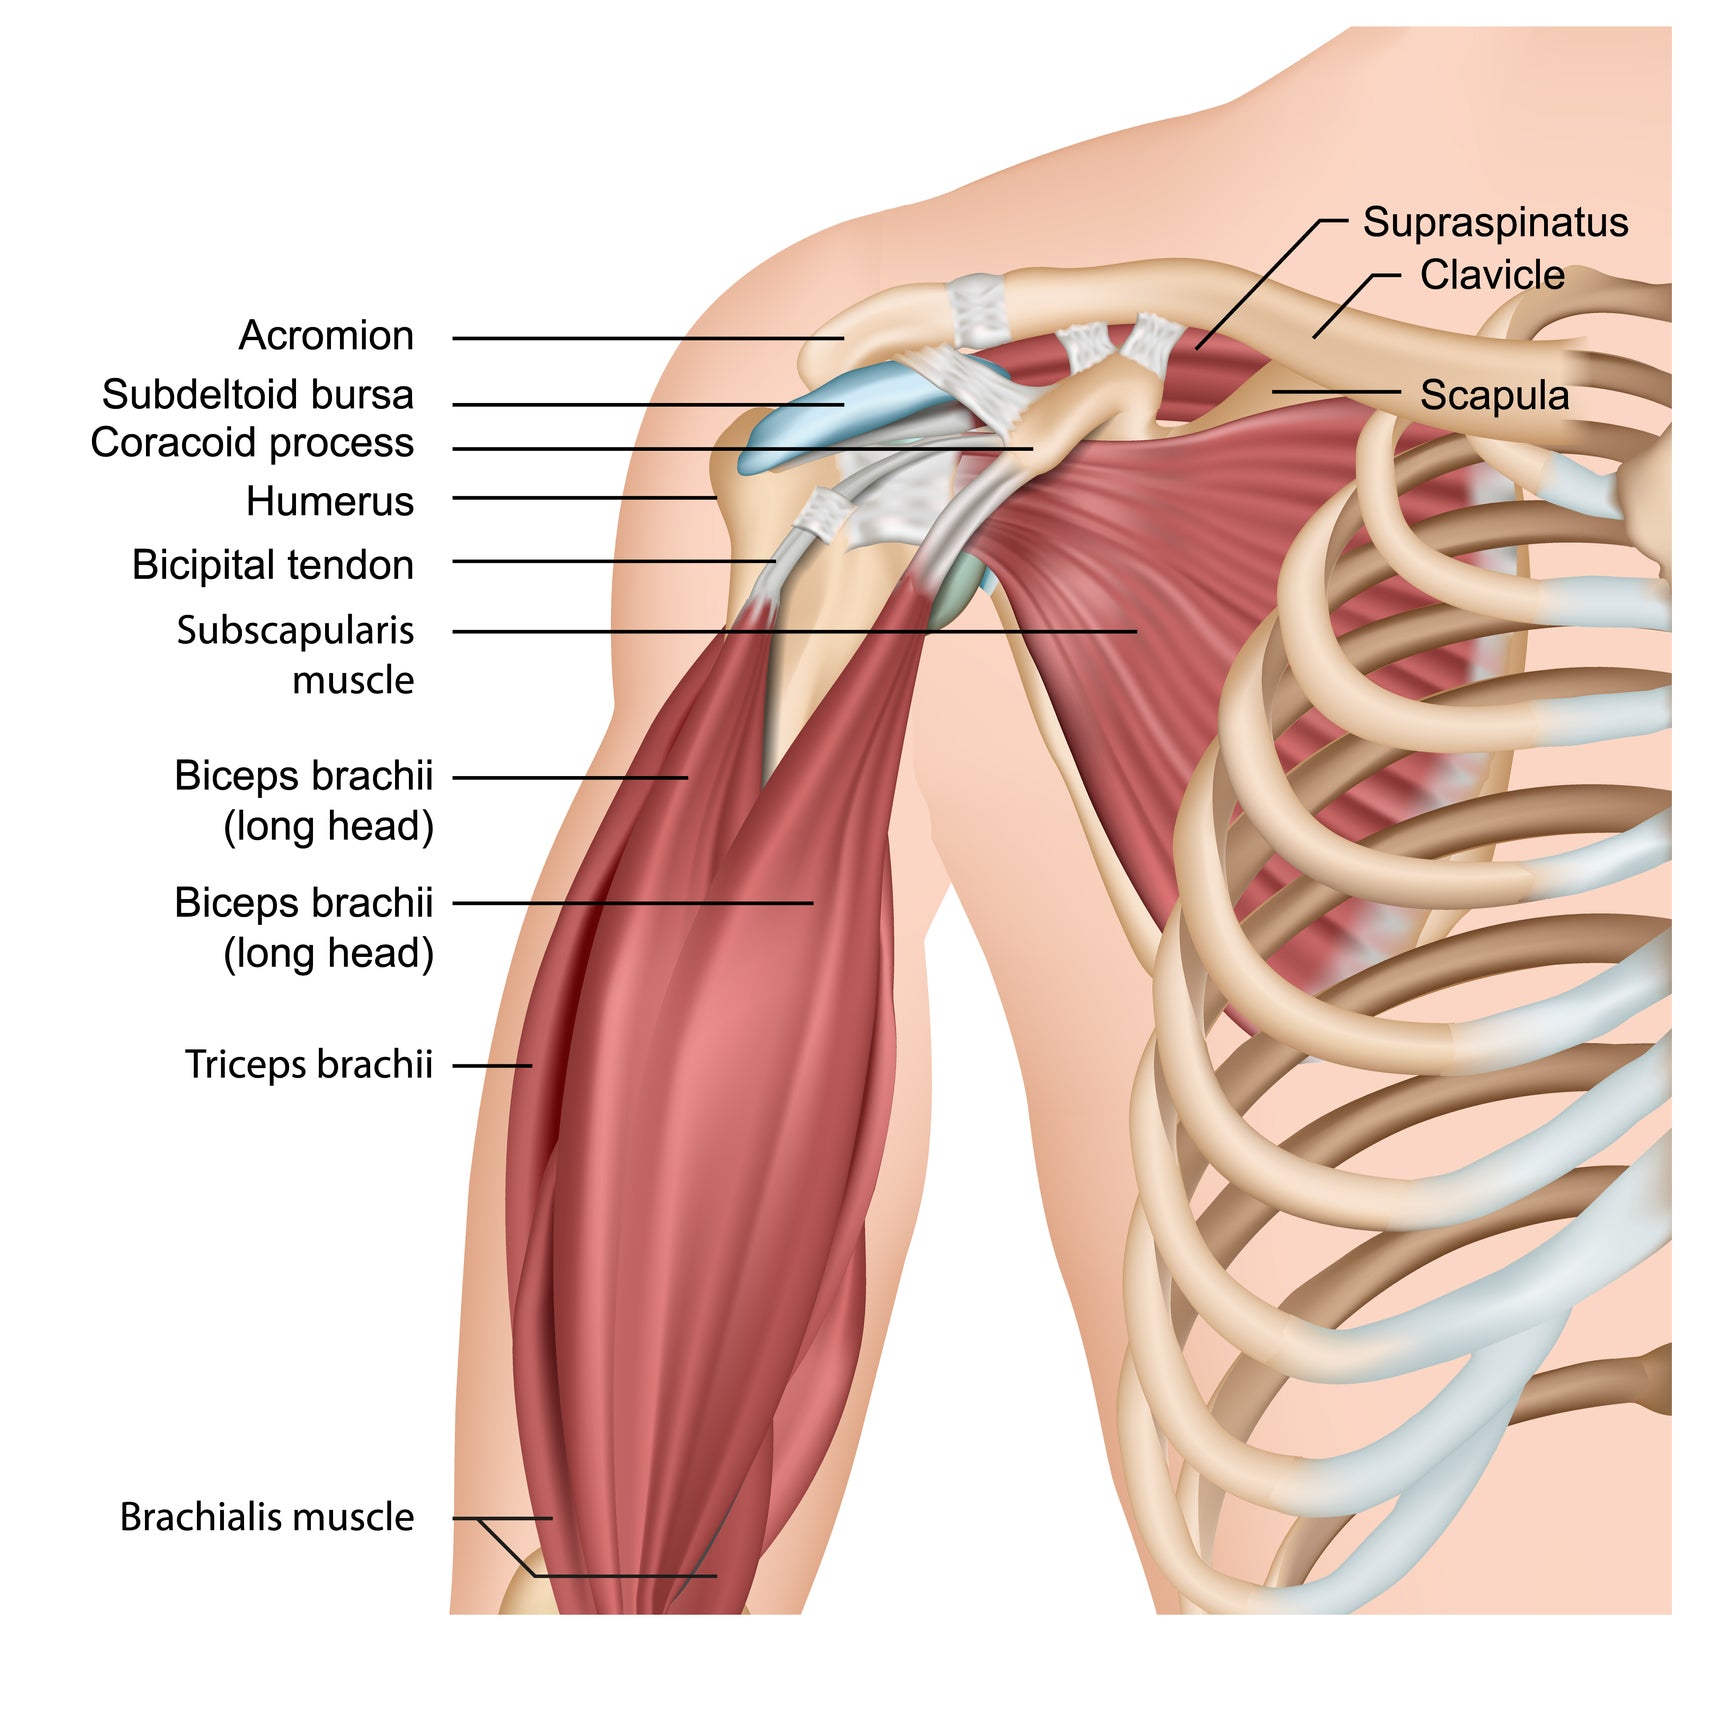 Treating Trigger Points in the Biceps